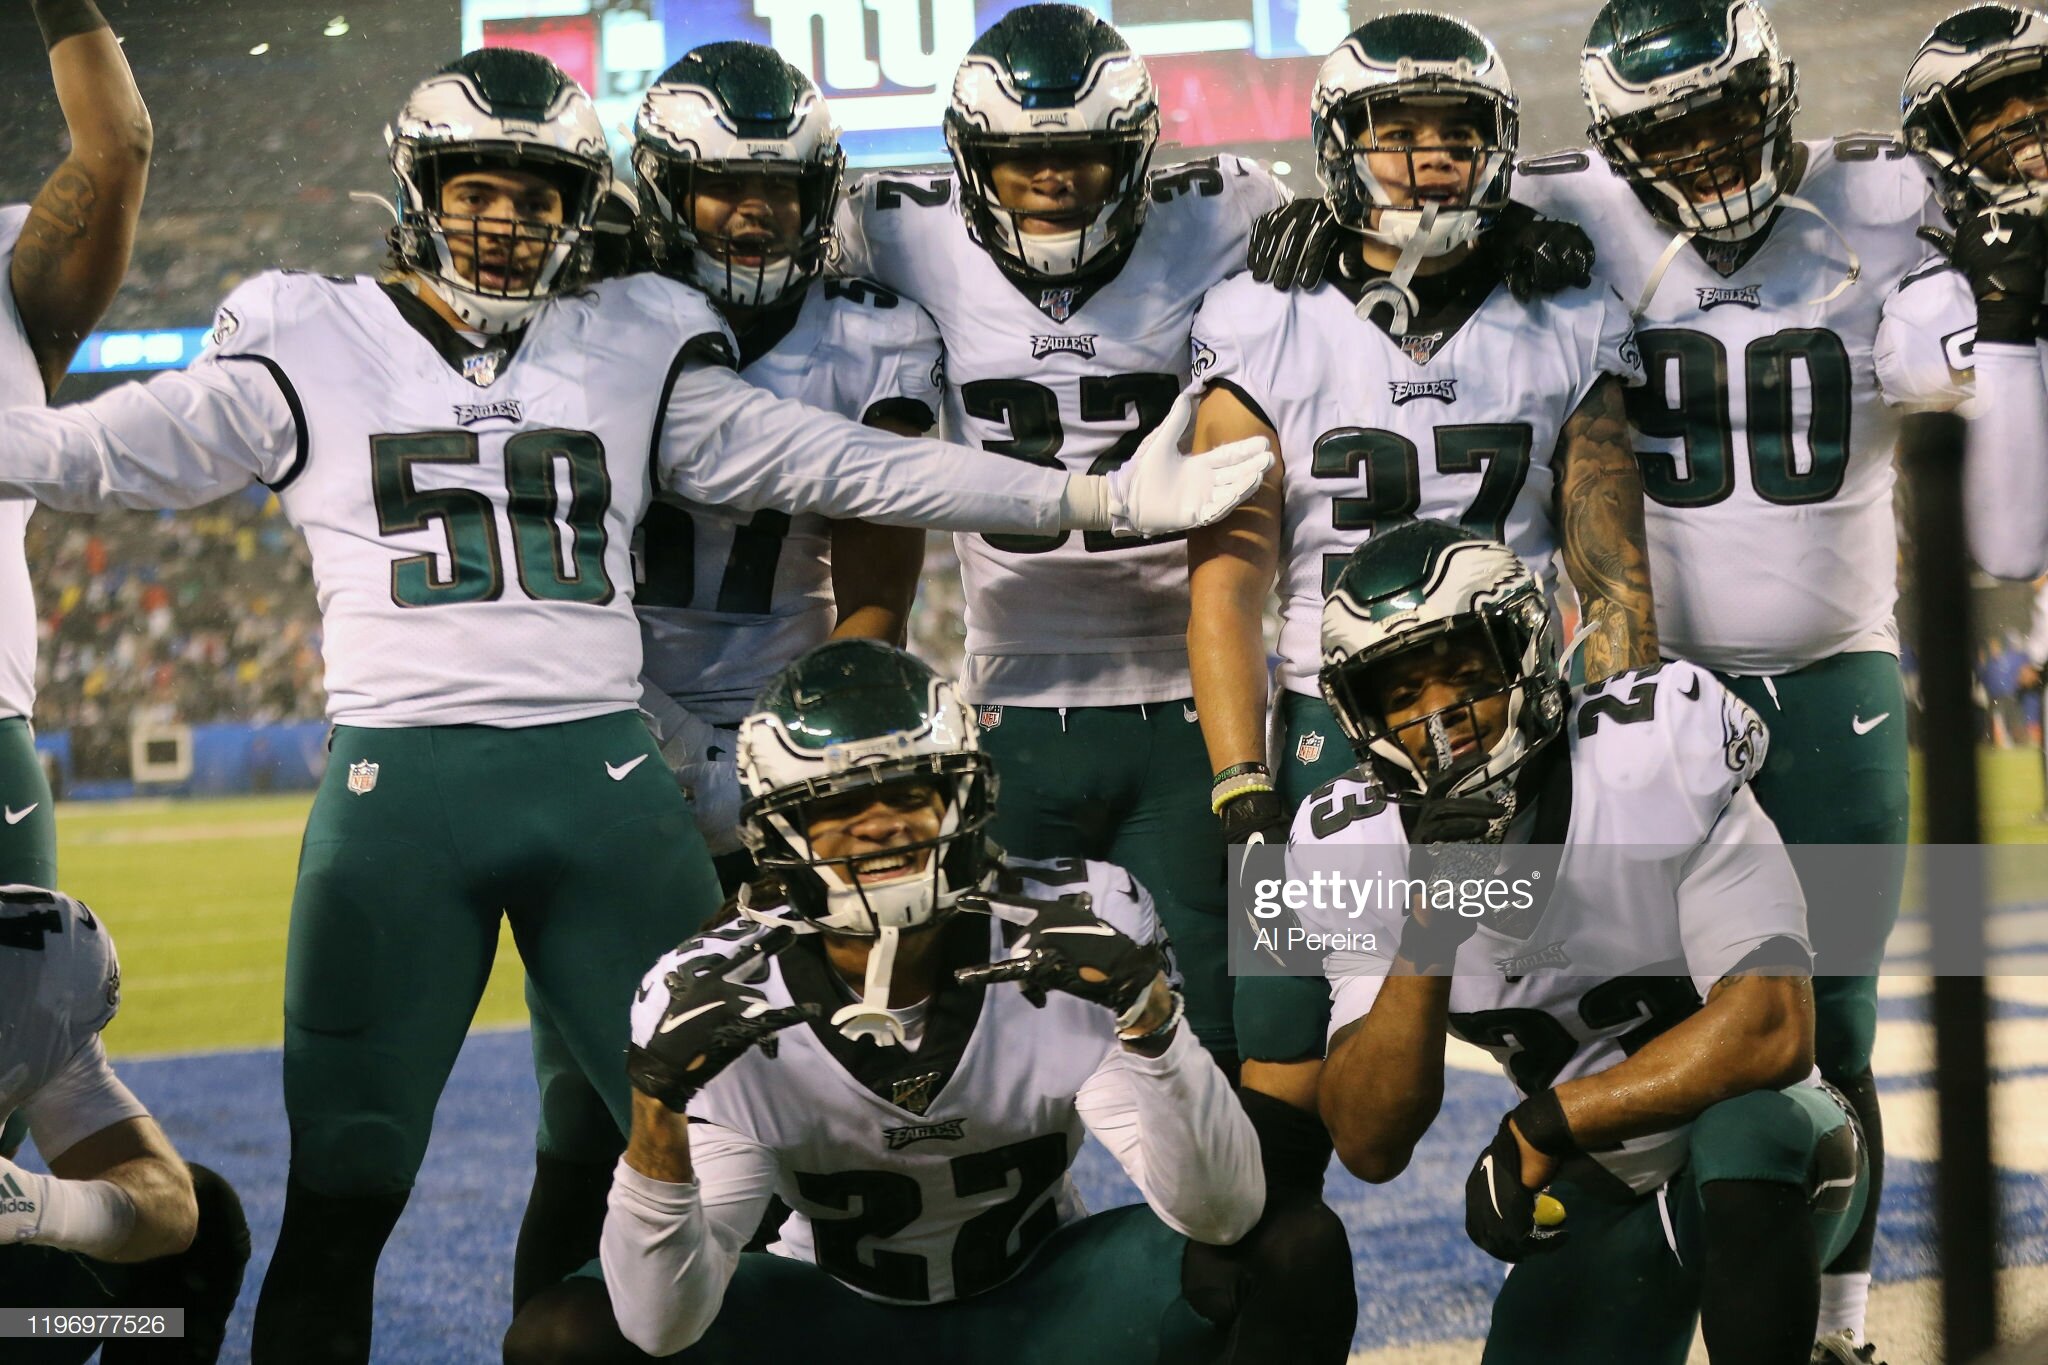 The Eagles Secondary Grade — Inside The Hashes